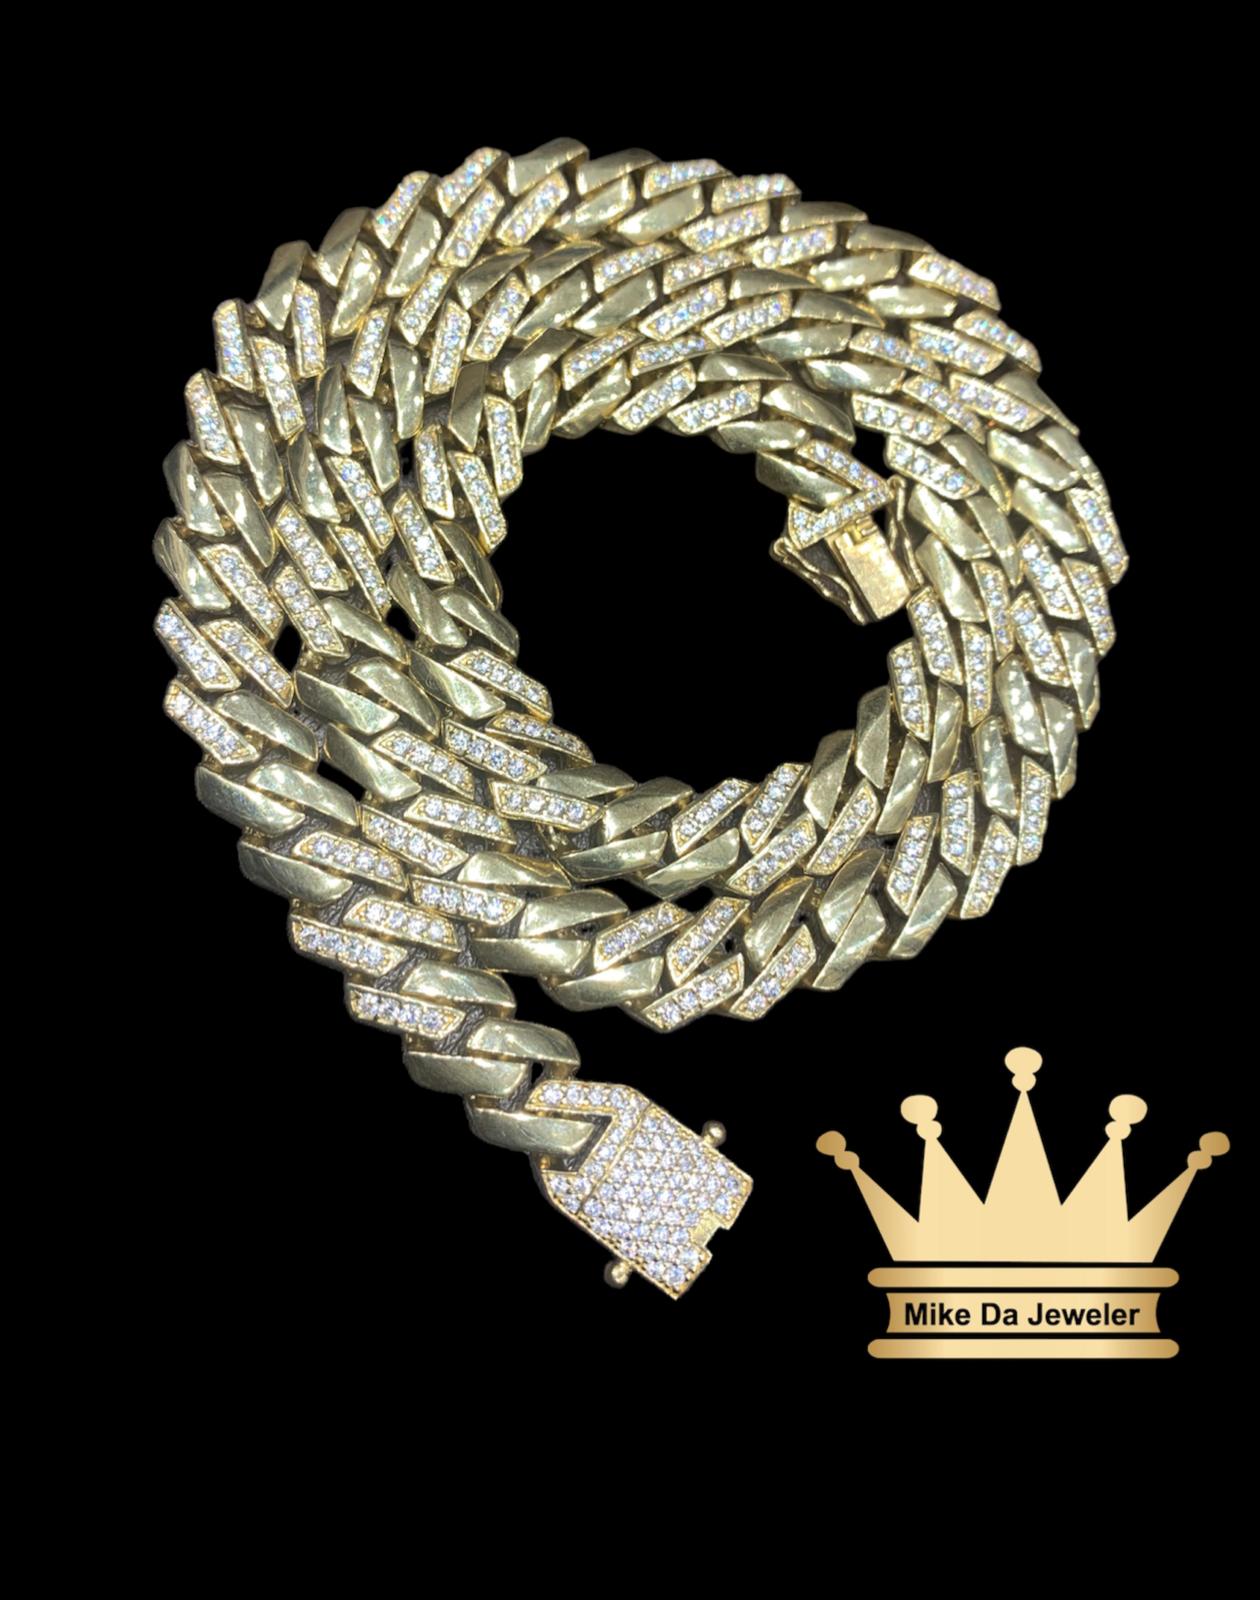 18k semisolid Miami Cuban link chain with cubic zirconia stone in it price $5650 USD weight 57.70 gram 22 inches 9mm